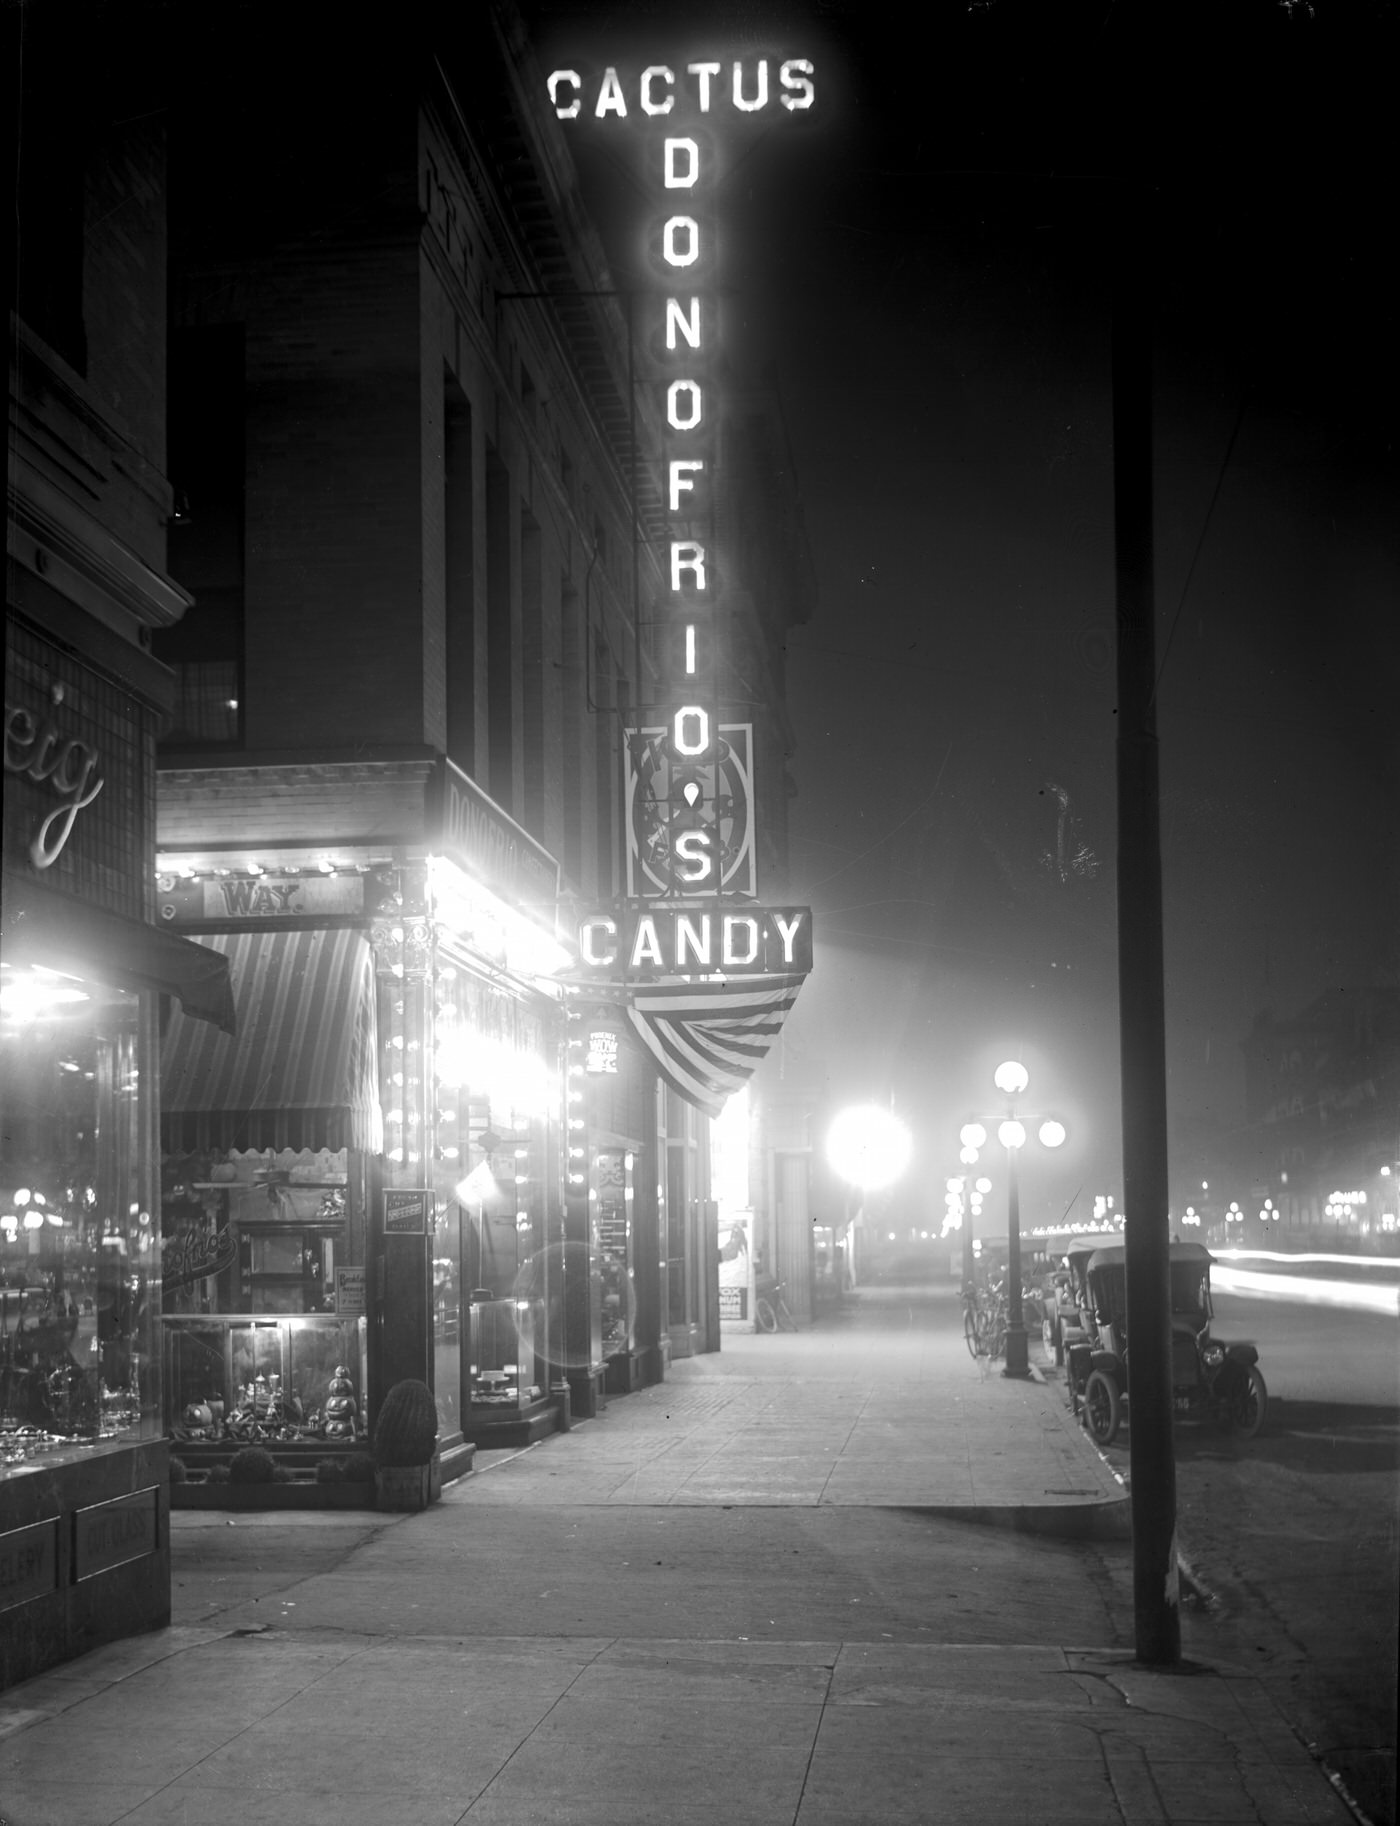 Donofrio's Candy Store at Night, 1917. This store was located on Washington Street in Phoenix.